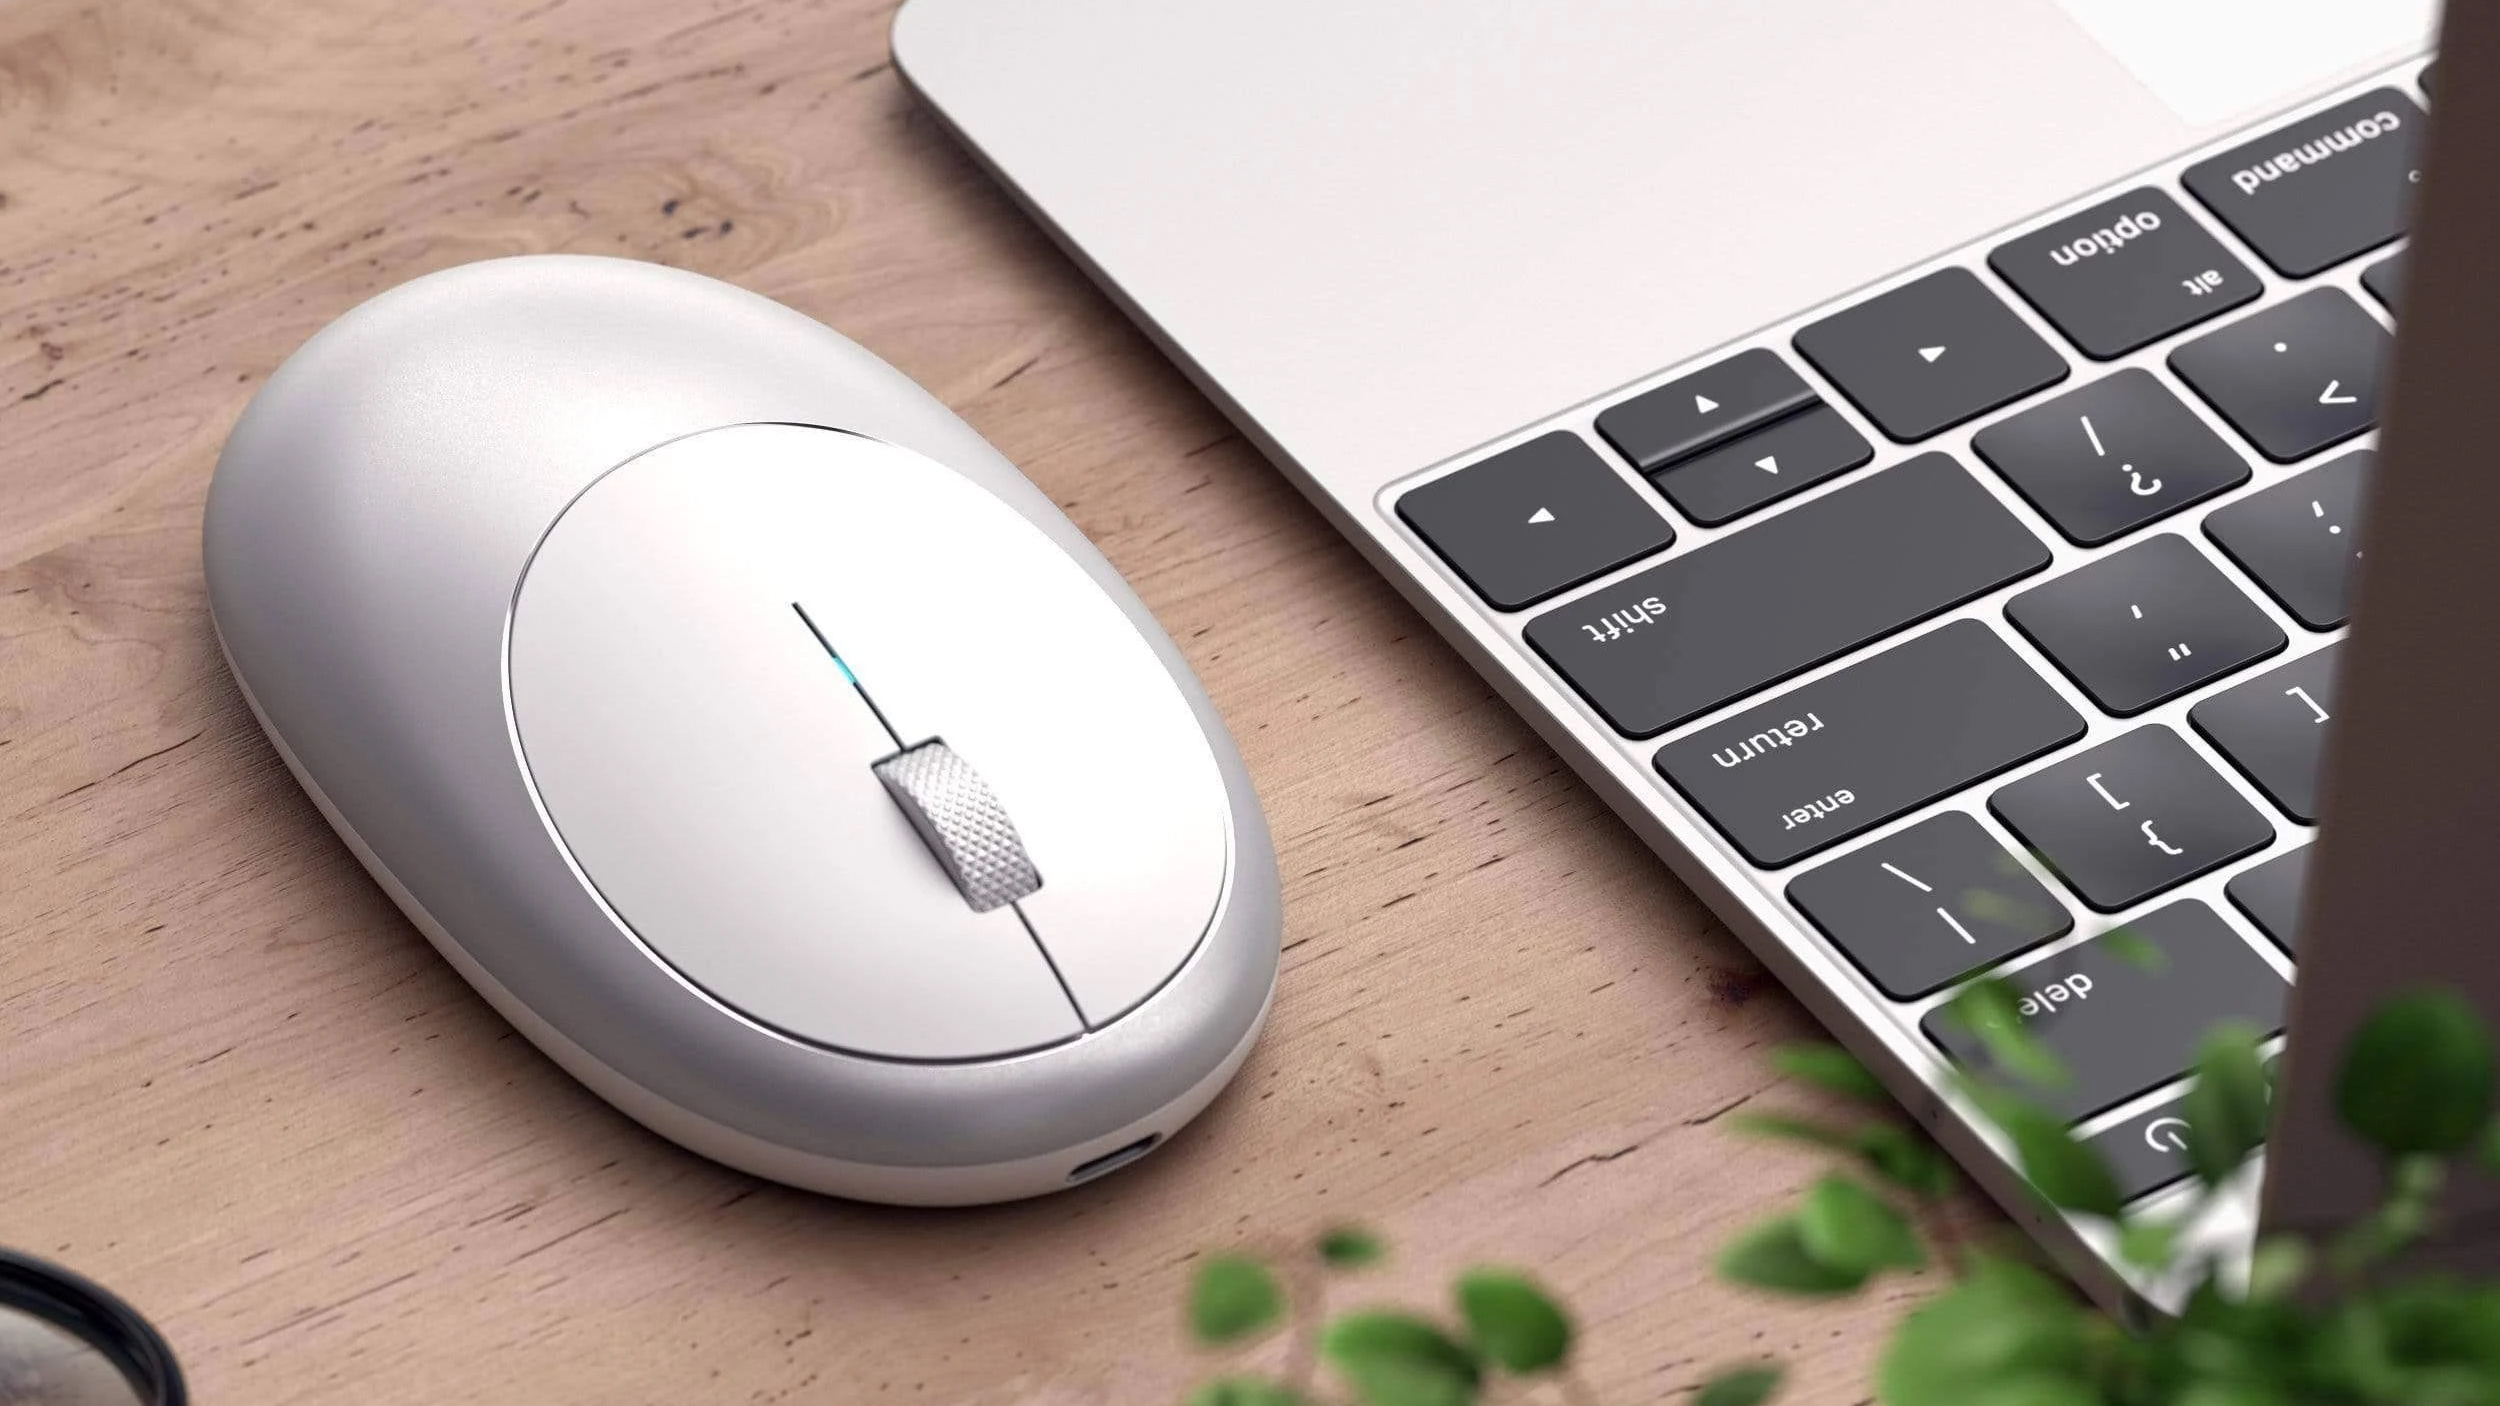 microsoft mouse on macbook